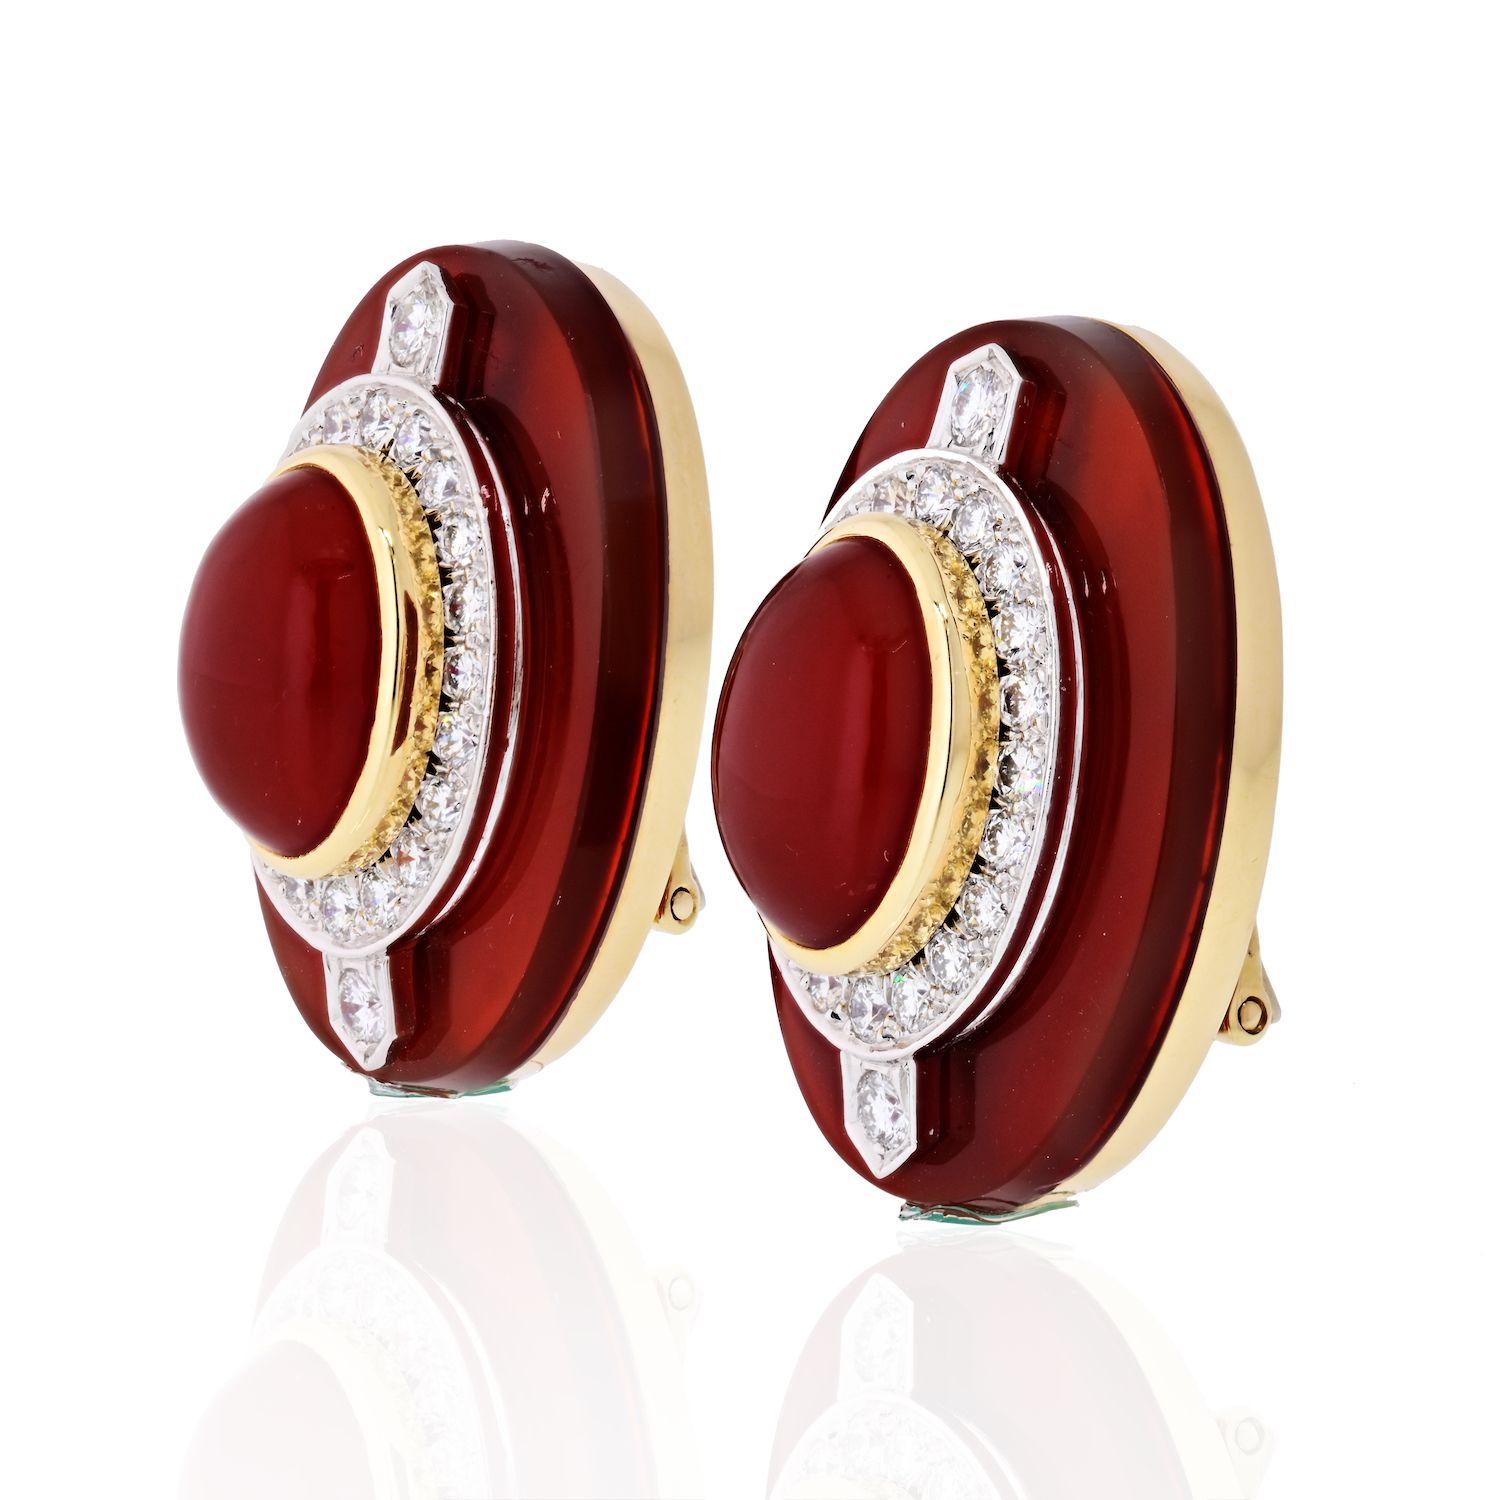 Containing two oval shape cabochon cut carnelian measuring approximately 14.75 x 10.80 x 7.20 mm and 44 round brilliant cut diamonds weighing approximately 1.50 carats total. Earring length 1.1 inches.
